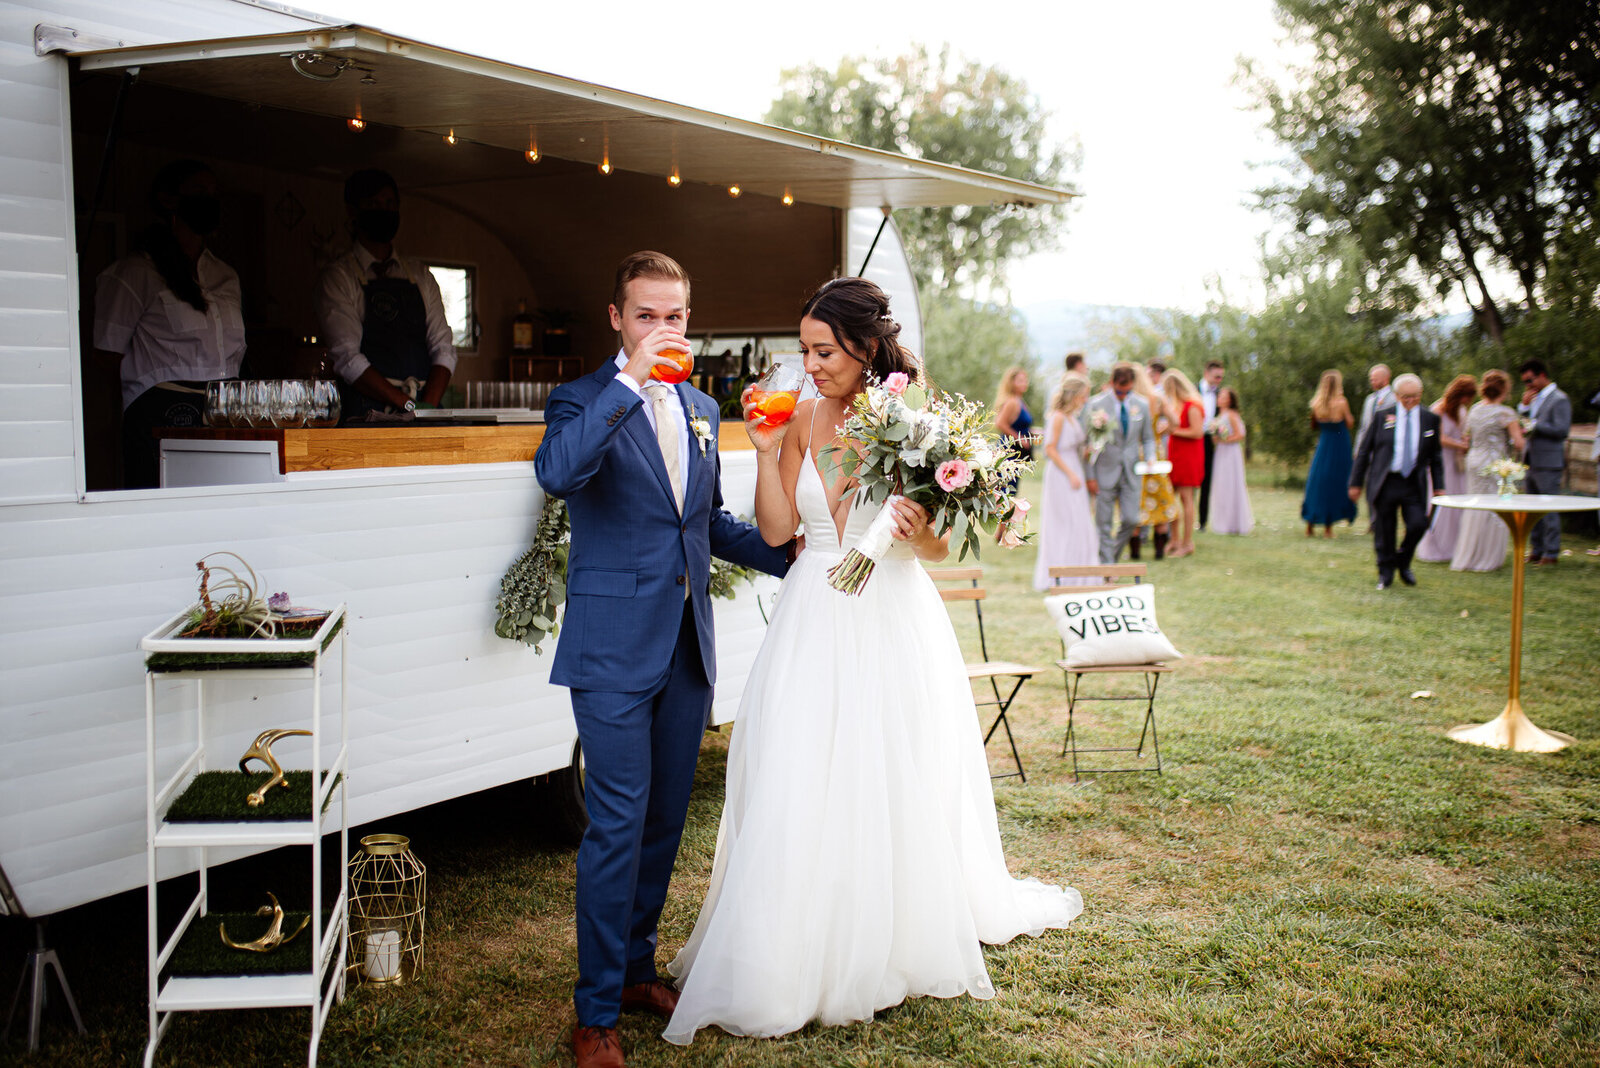 bride and groom get their first drink at their mobile bar in outdoor wedding setting